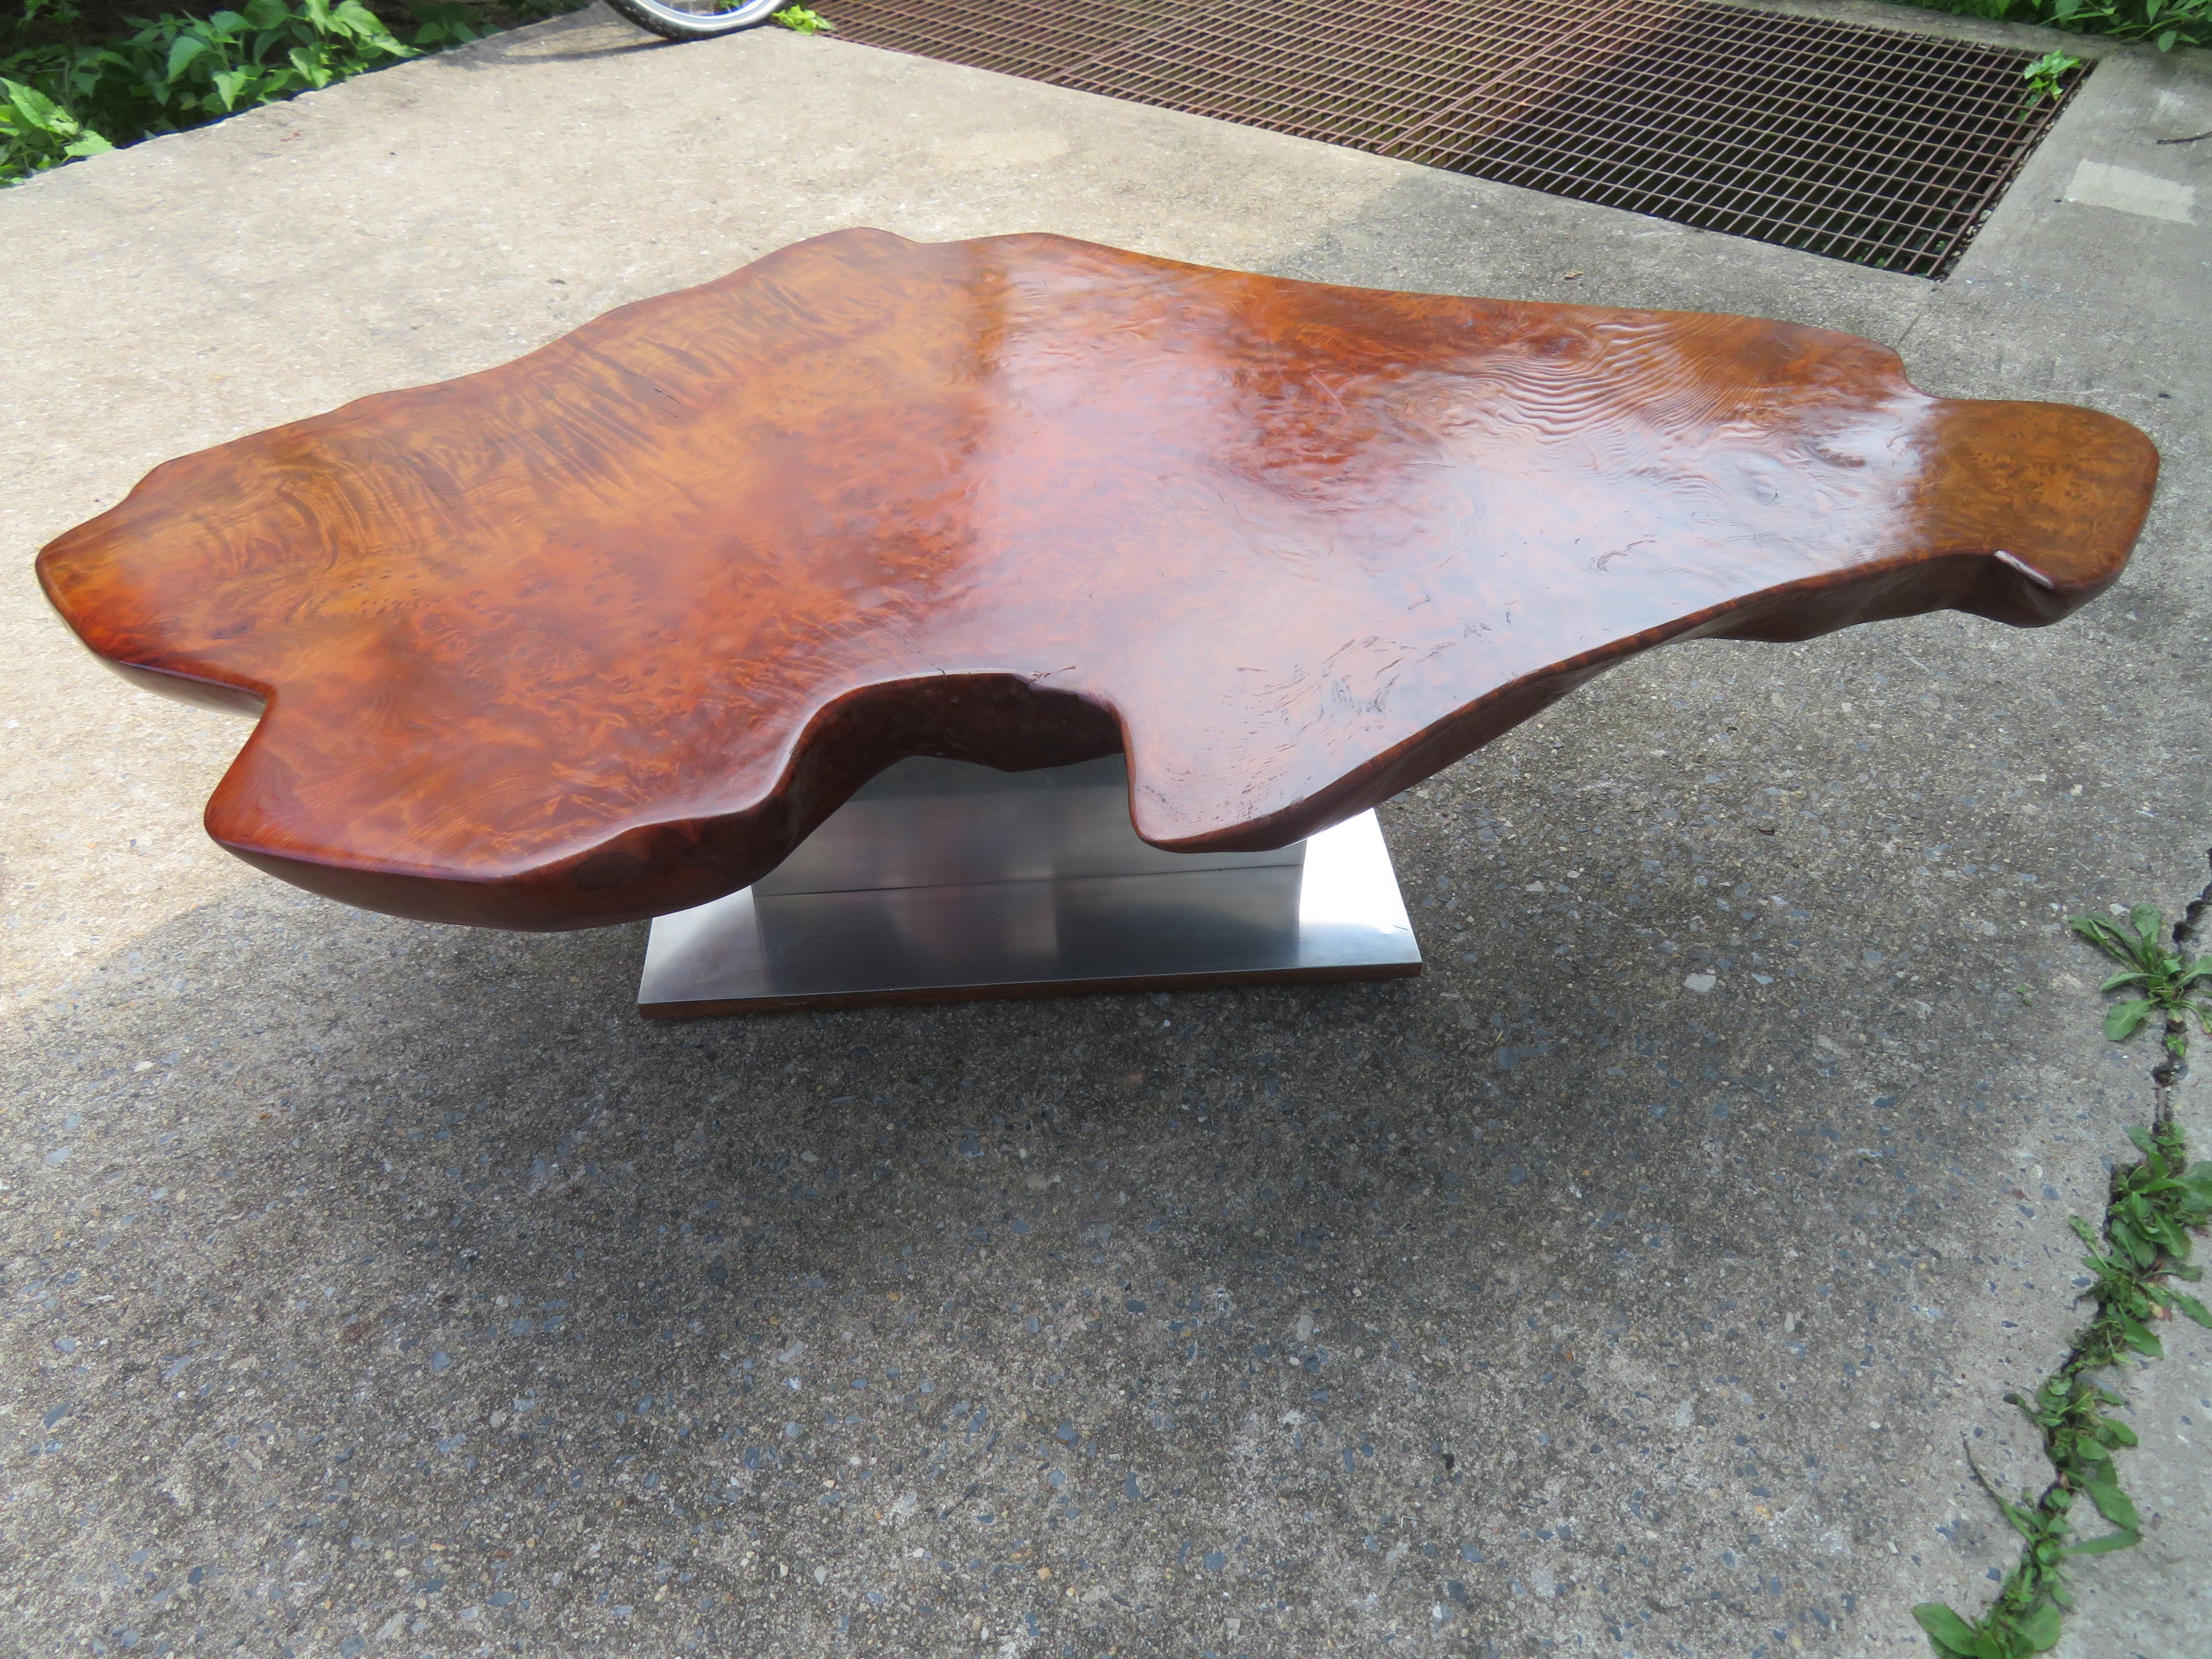 Magnificent Nakashima style free edge bird's-eye maple slab coffee table with chunky steel base. This table was designed and crafted by the very talented contemporary artist Gary Zayon about 15 years ago.
He is a modern furniture designer and